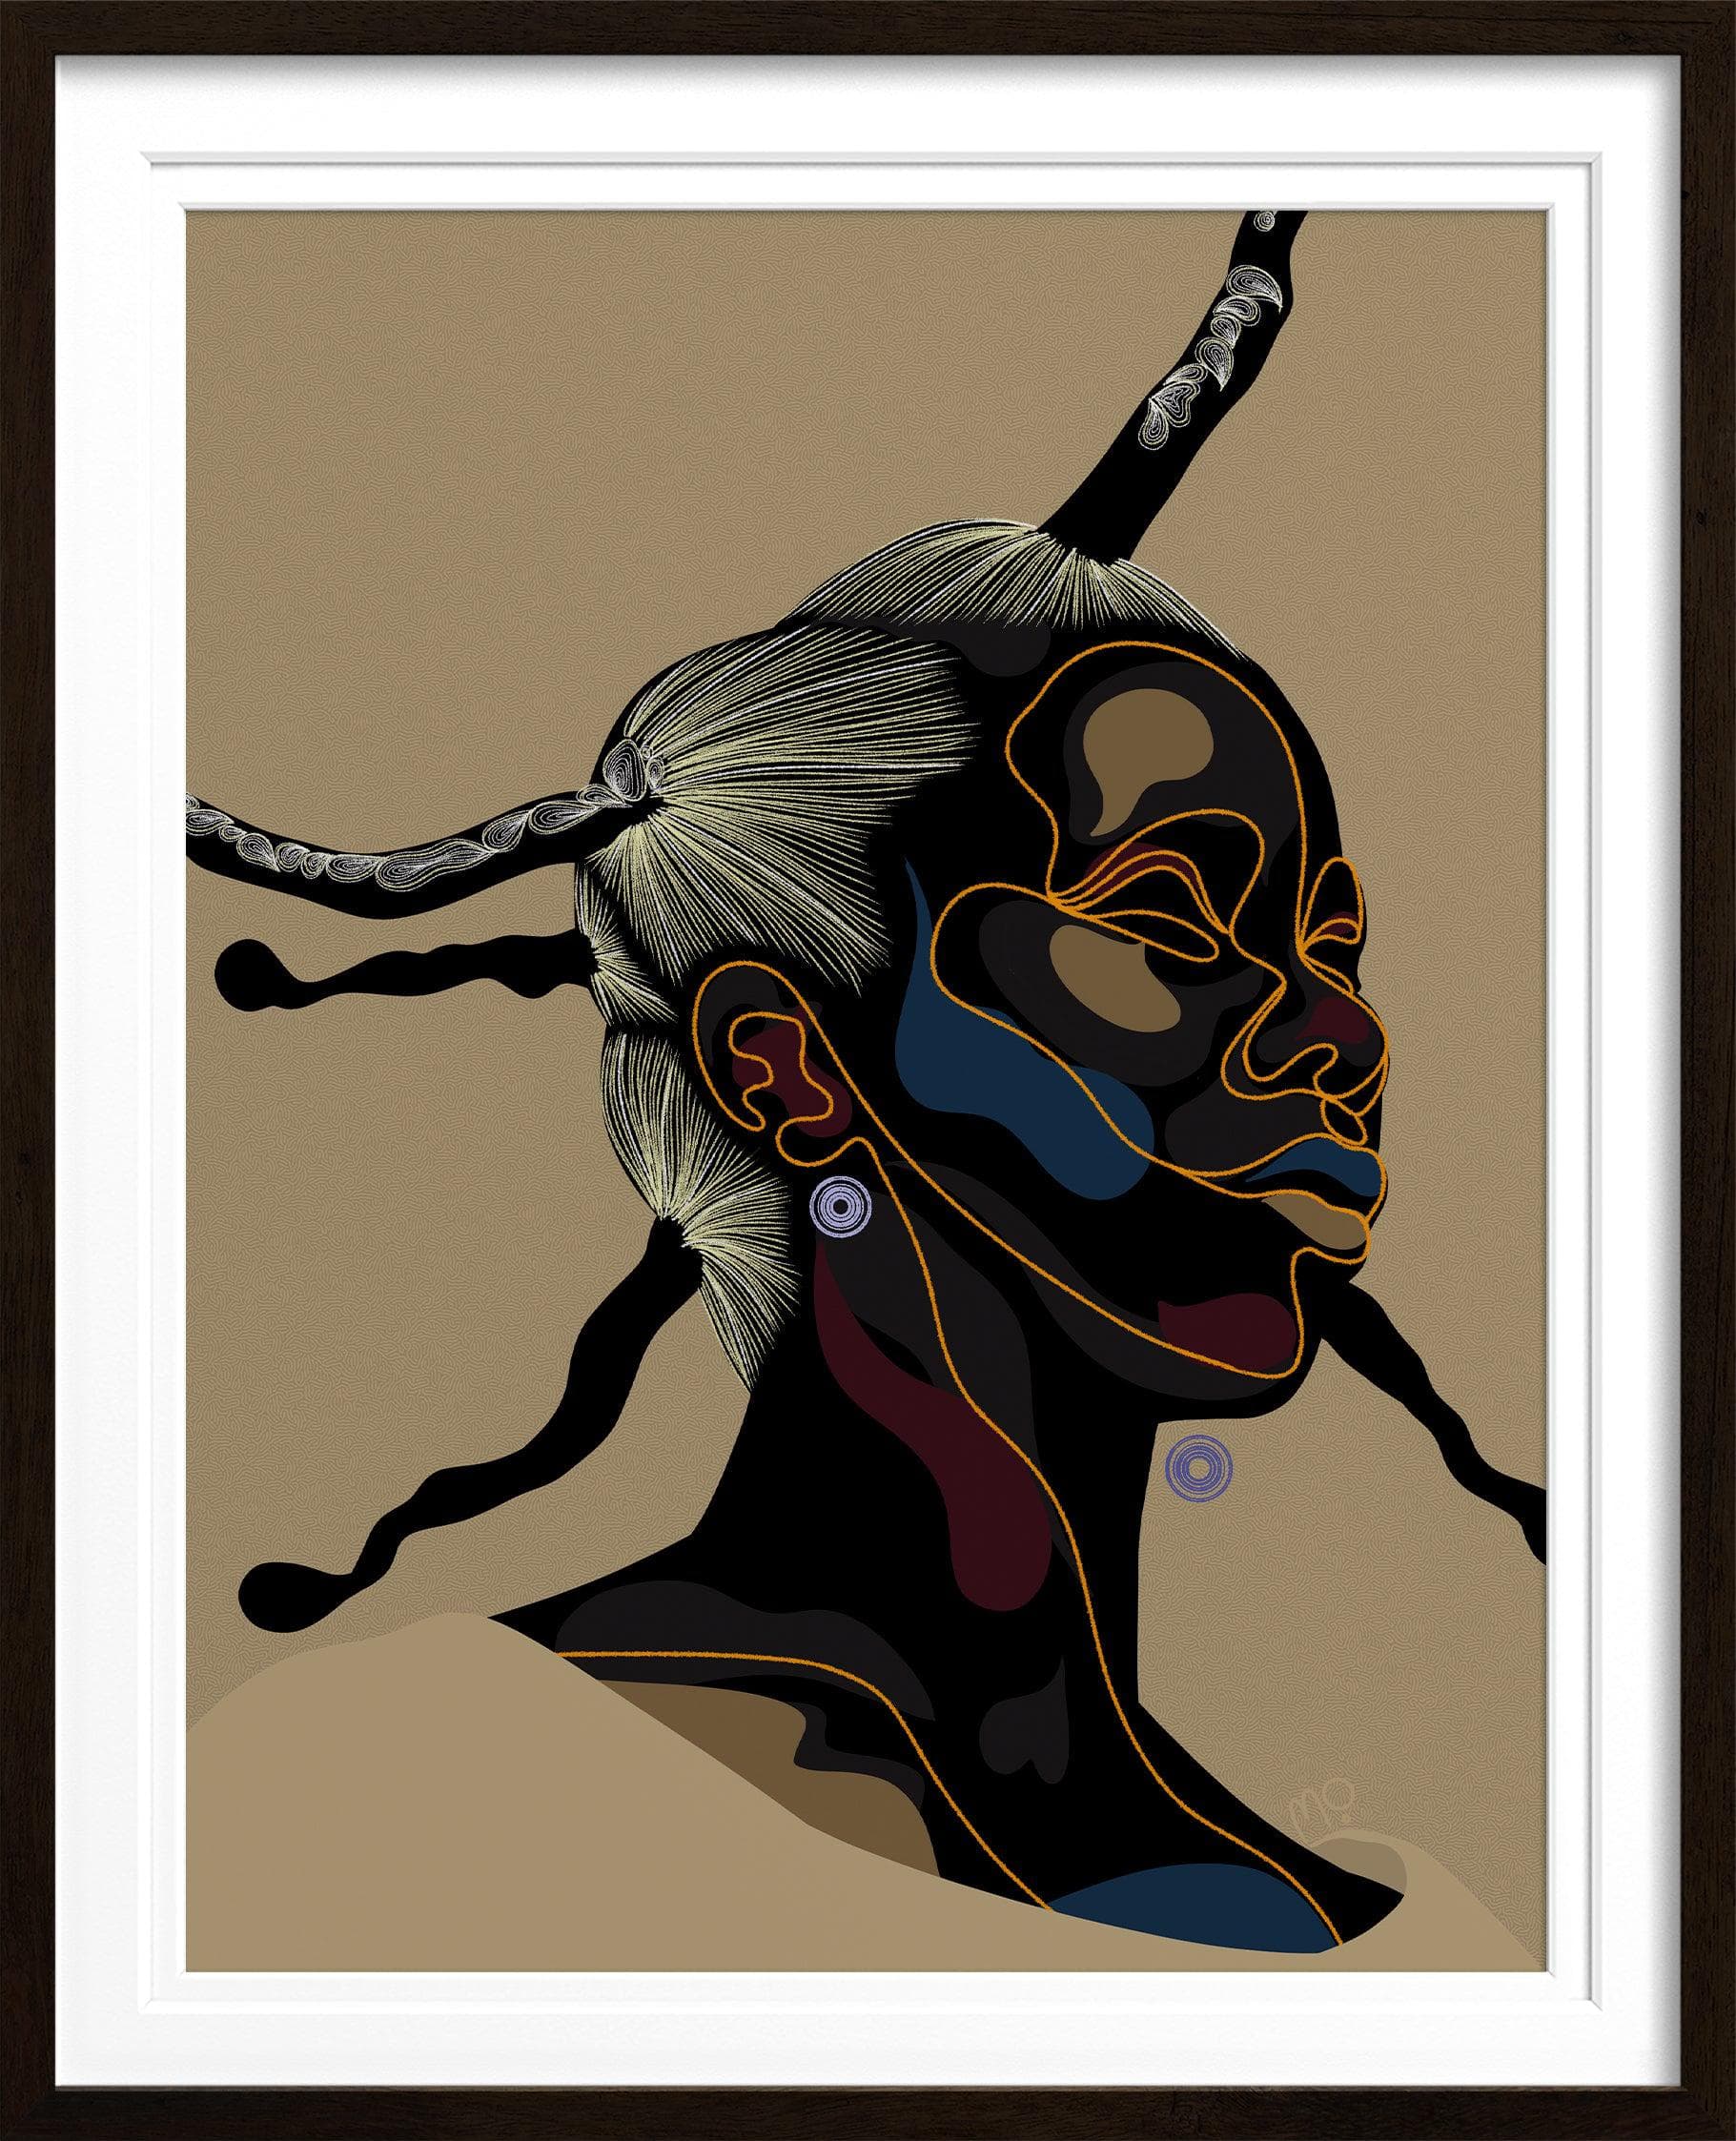 Contemporary Black Art  African and Black Culture Wall Paintings - Ivhu Art